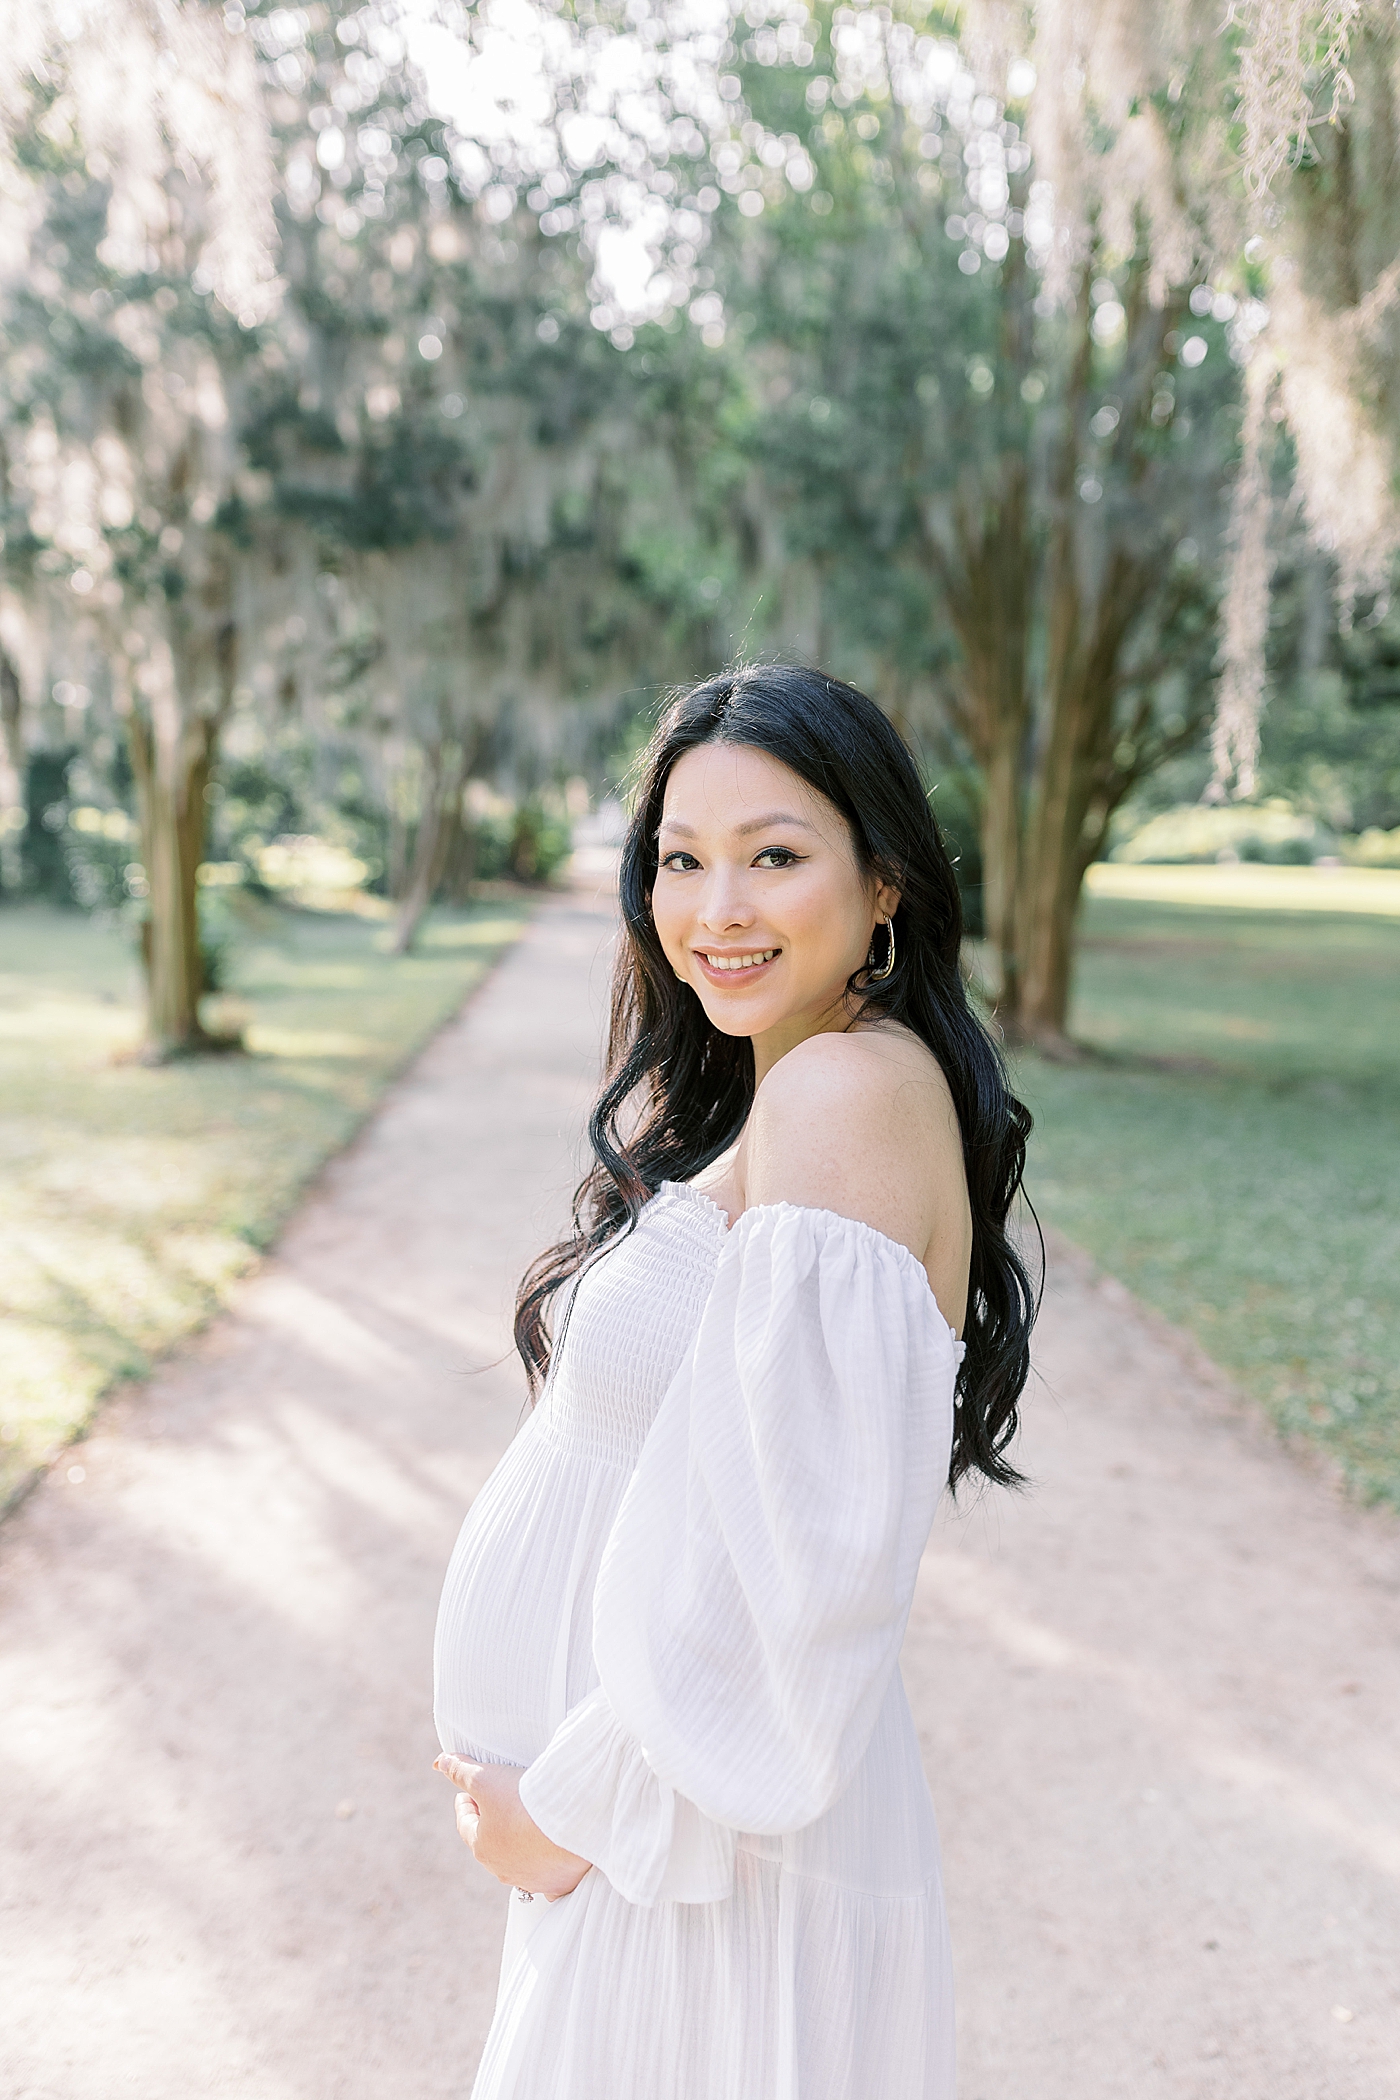 Smiling mother to be in a white dress during her maternity photos in Charleston | Photo by Caitlyn Motycka Photography